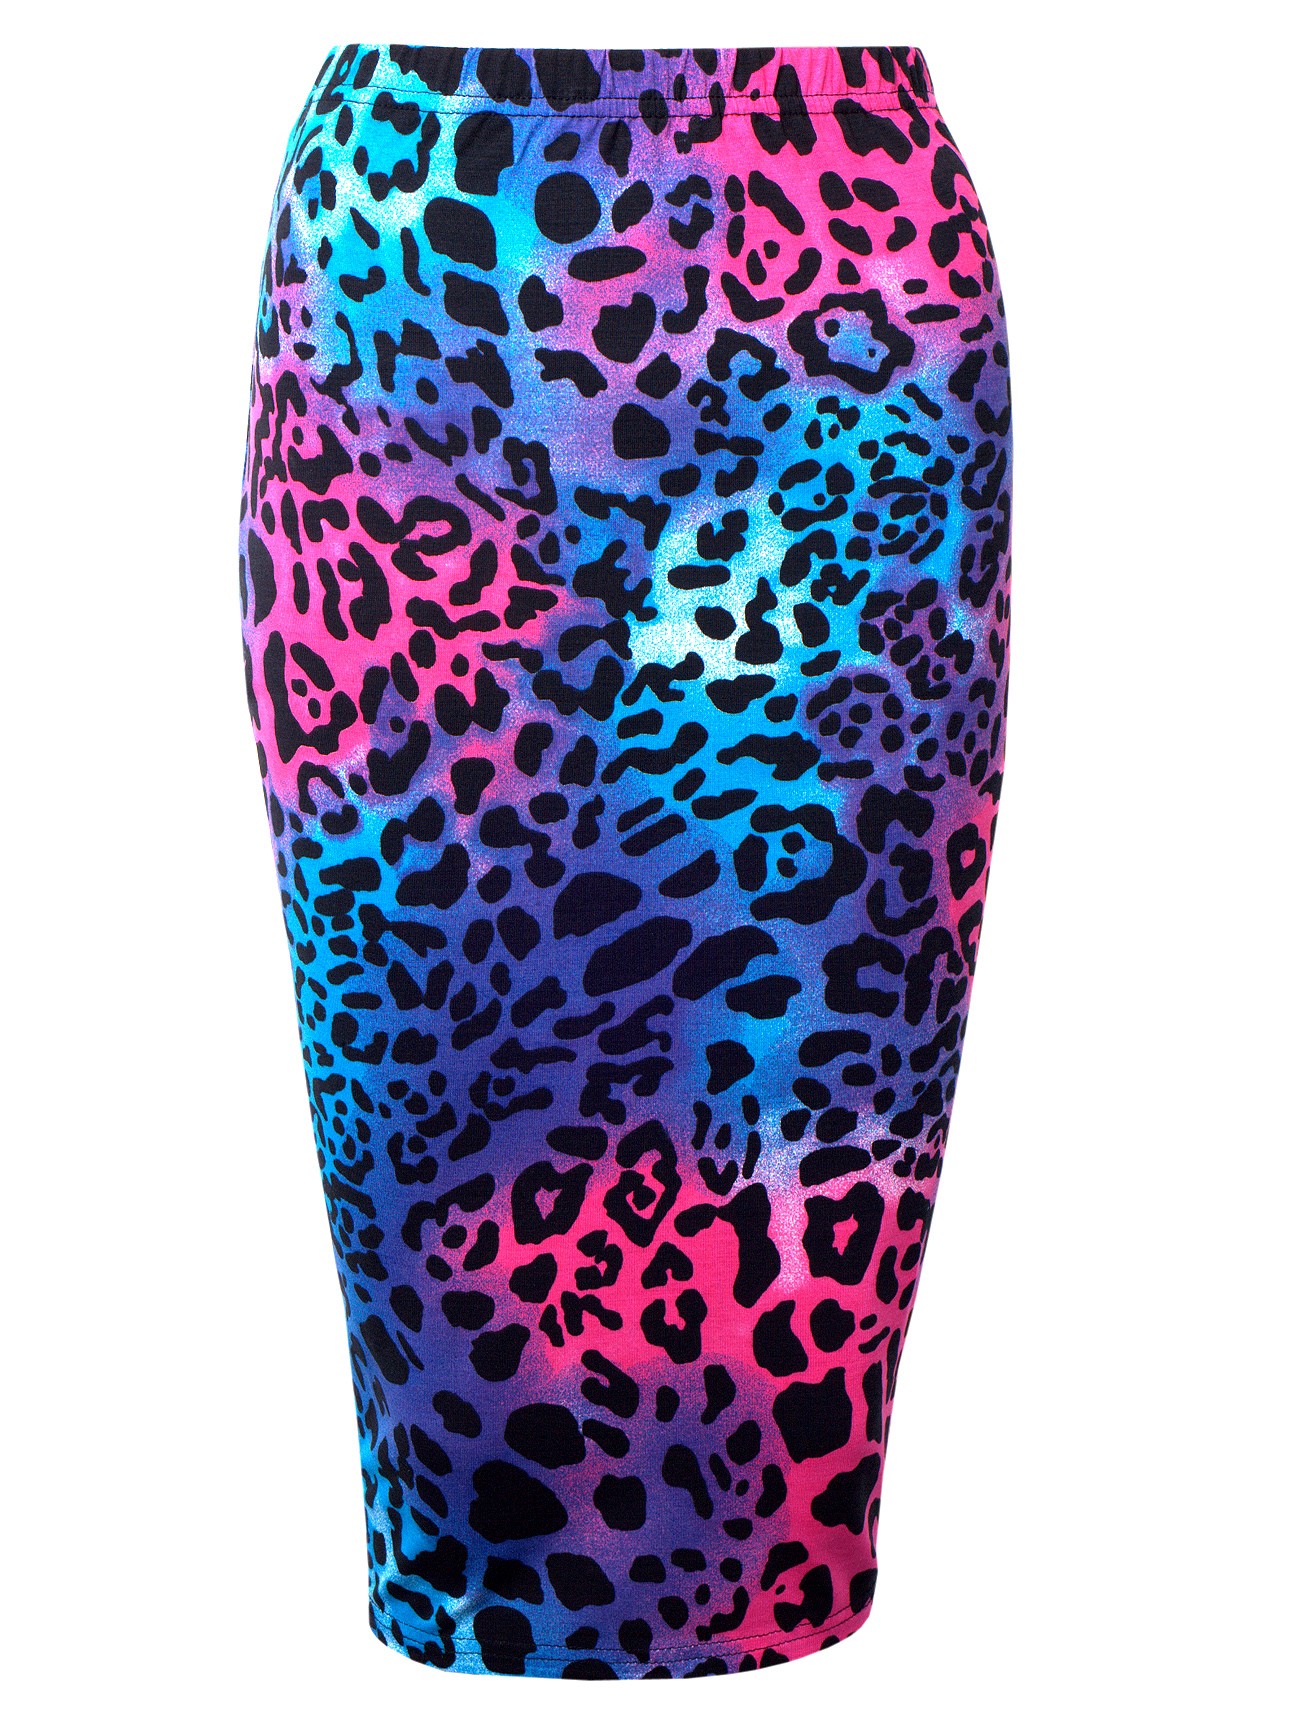 Images For > Colorful Cheetah Print Images